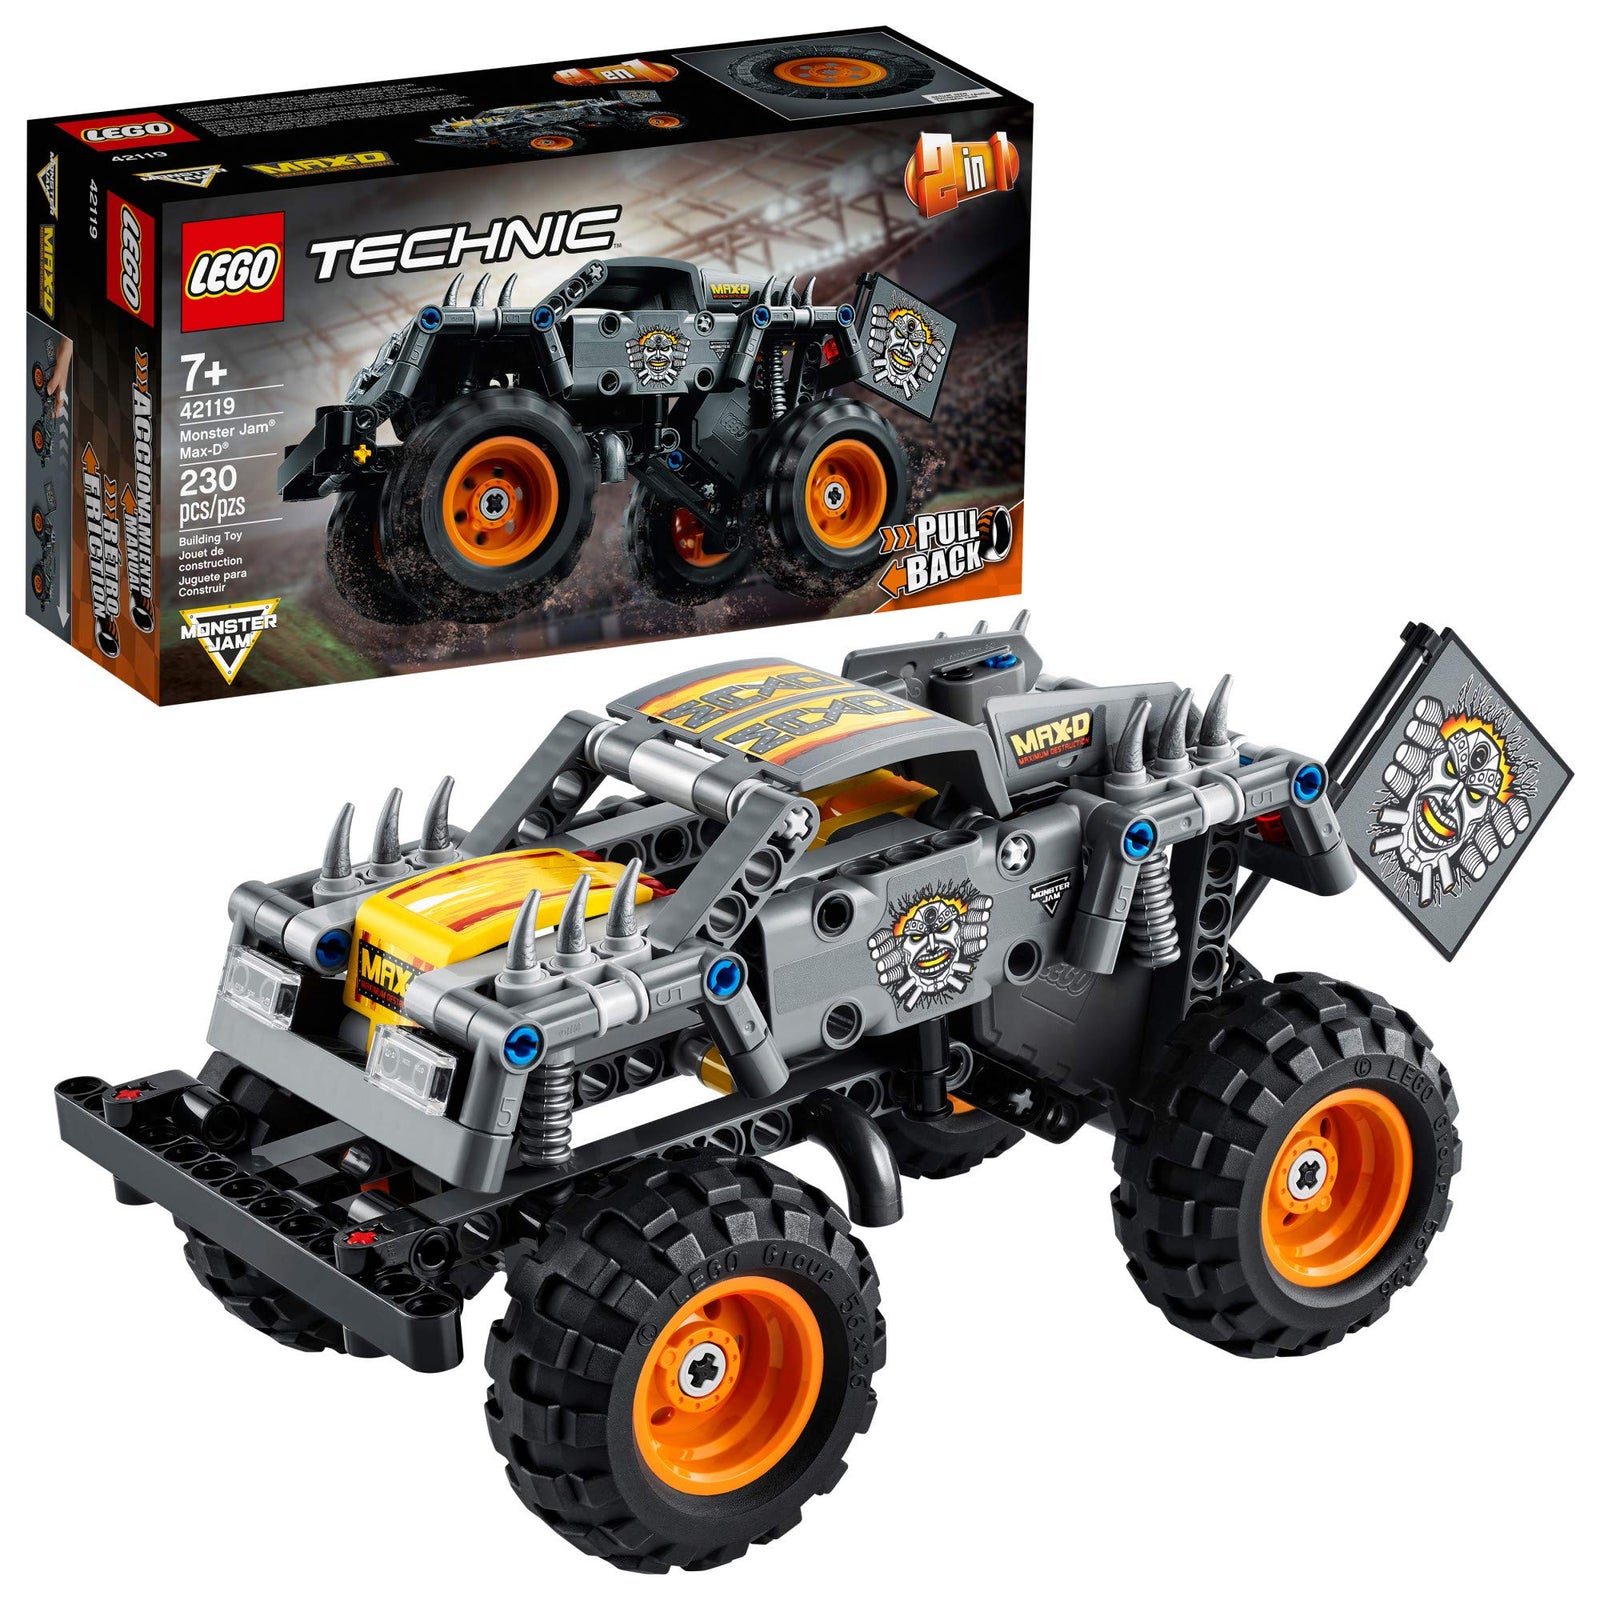 LEGO Technic Monster Jam Max-D 42119 Model Building Kit for Boys and Girls Who Love Monster Truck Toys, New 2021 (230 Pieces)